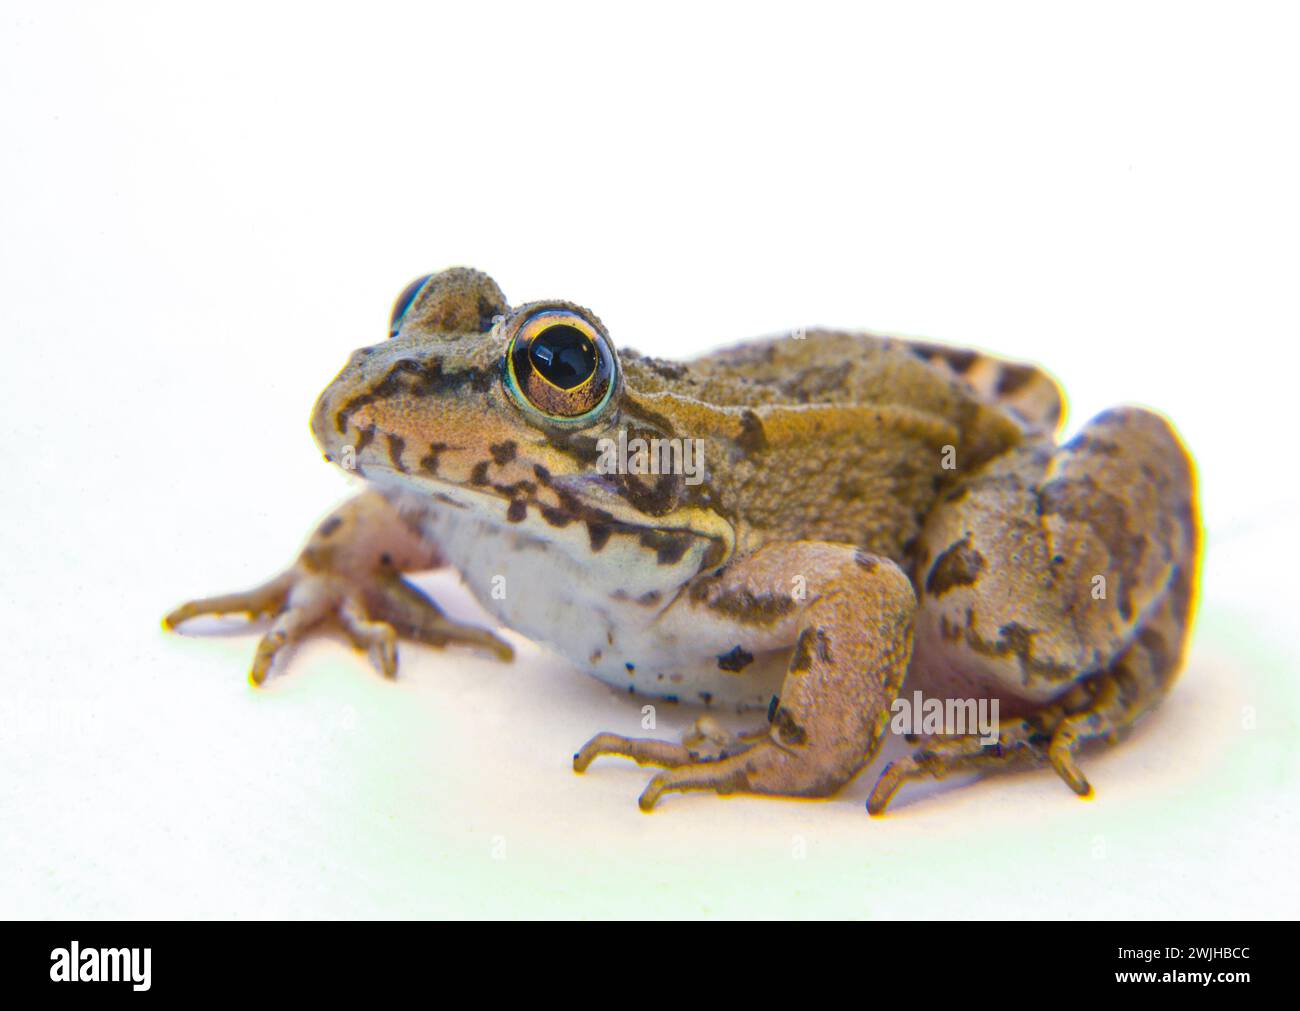 Young perez Frog or Pelophylax perez. Isoltated over white background Stock Photo